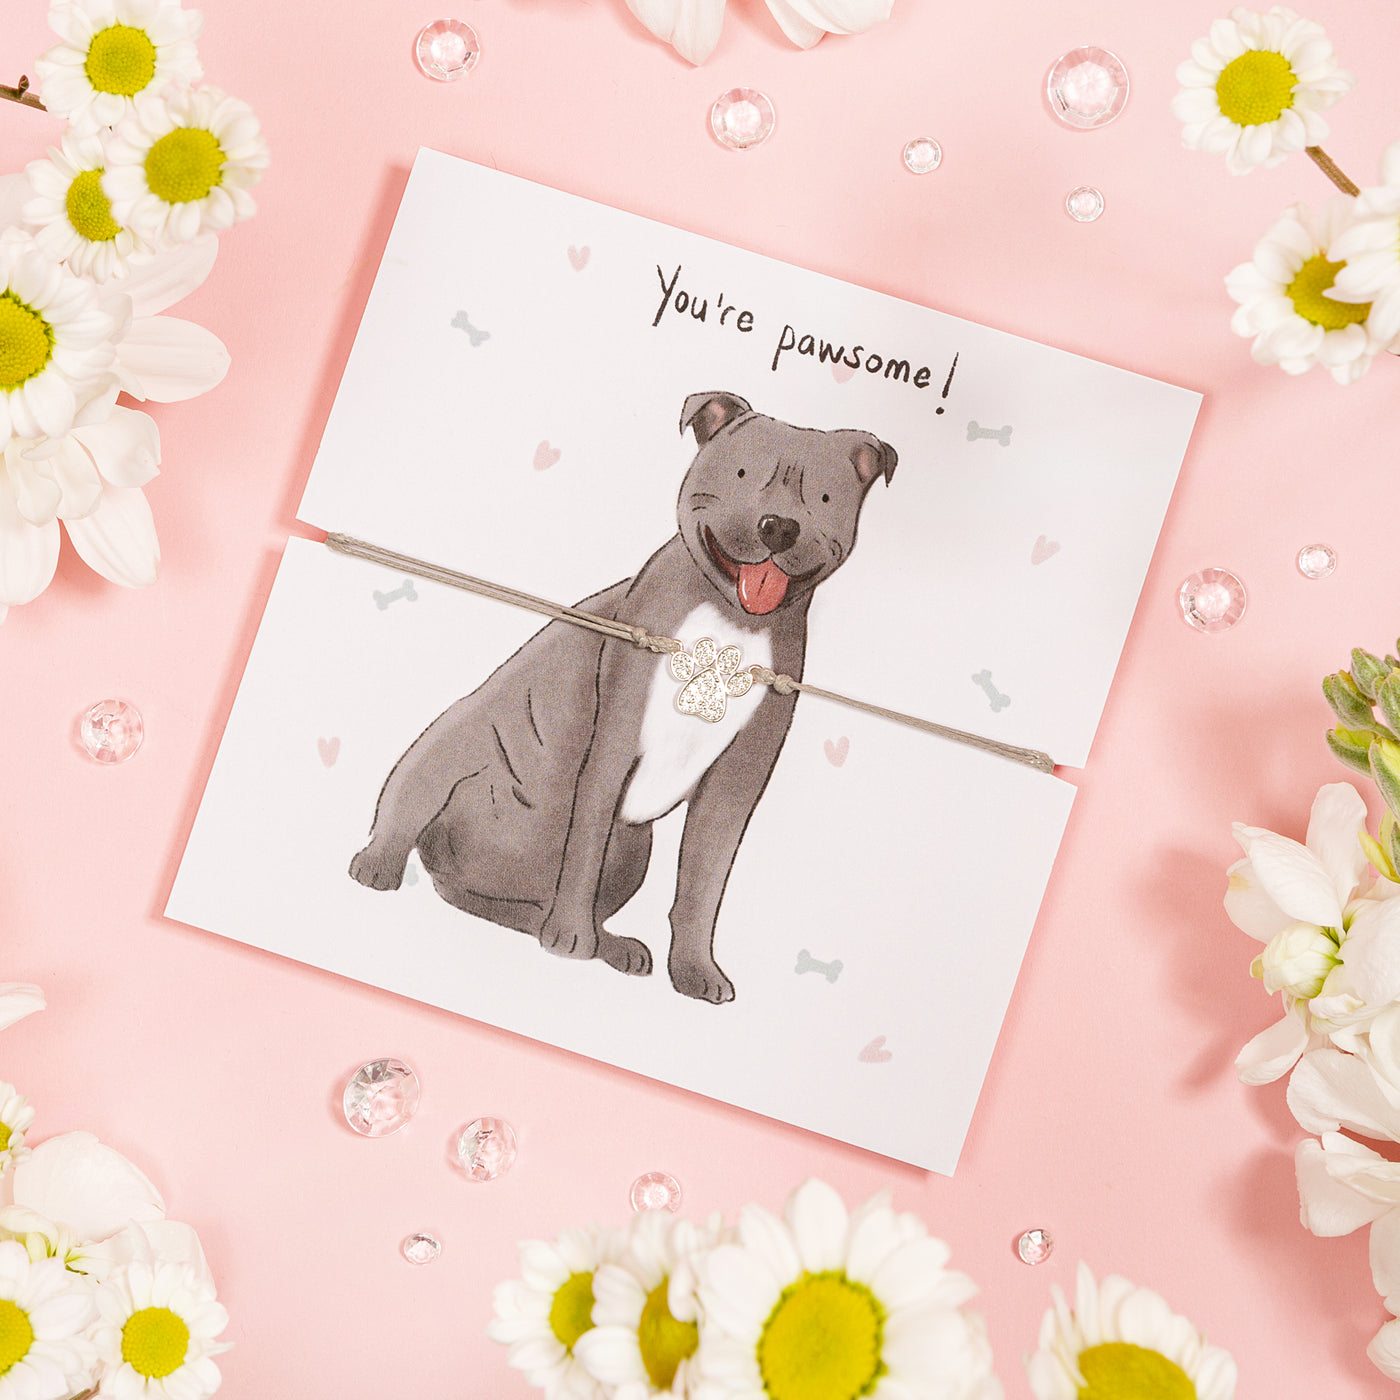 A playful greeting card set on a soft pink background, featuring a hand-drawn illustration of a smiling grey dog with the words 'You're pawsome!' above. The dog is adorned with a shimmering paw charm attached by a thin cord.